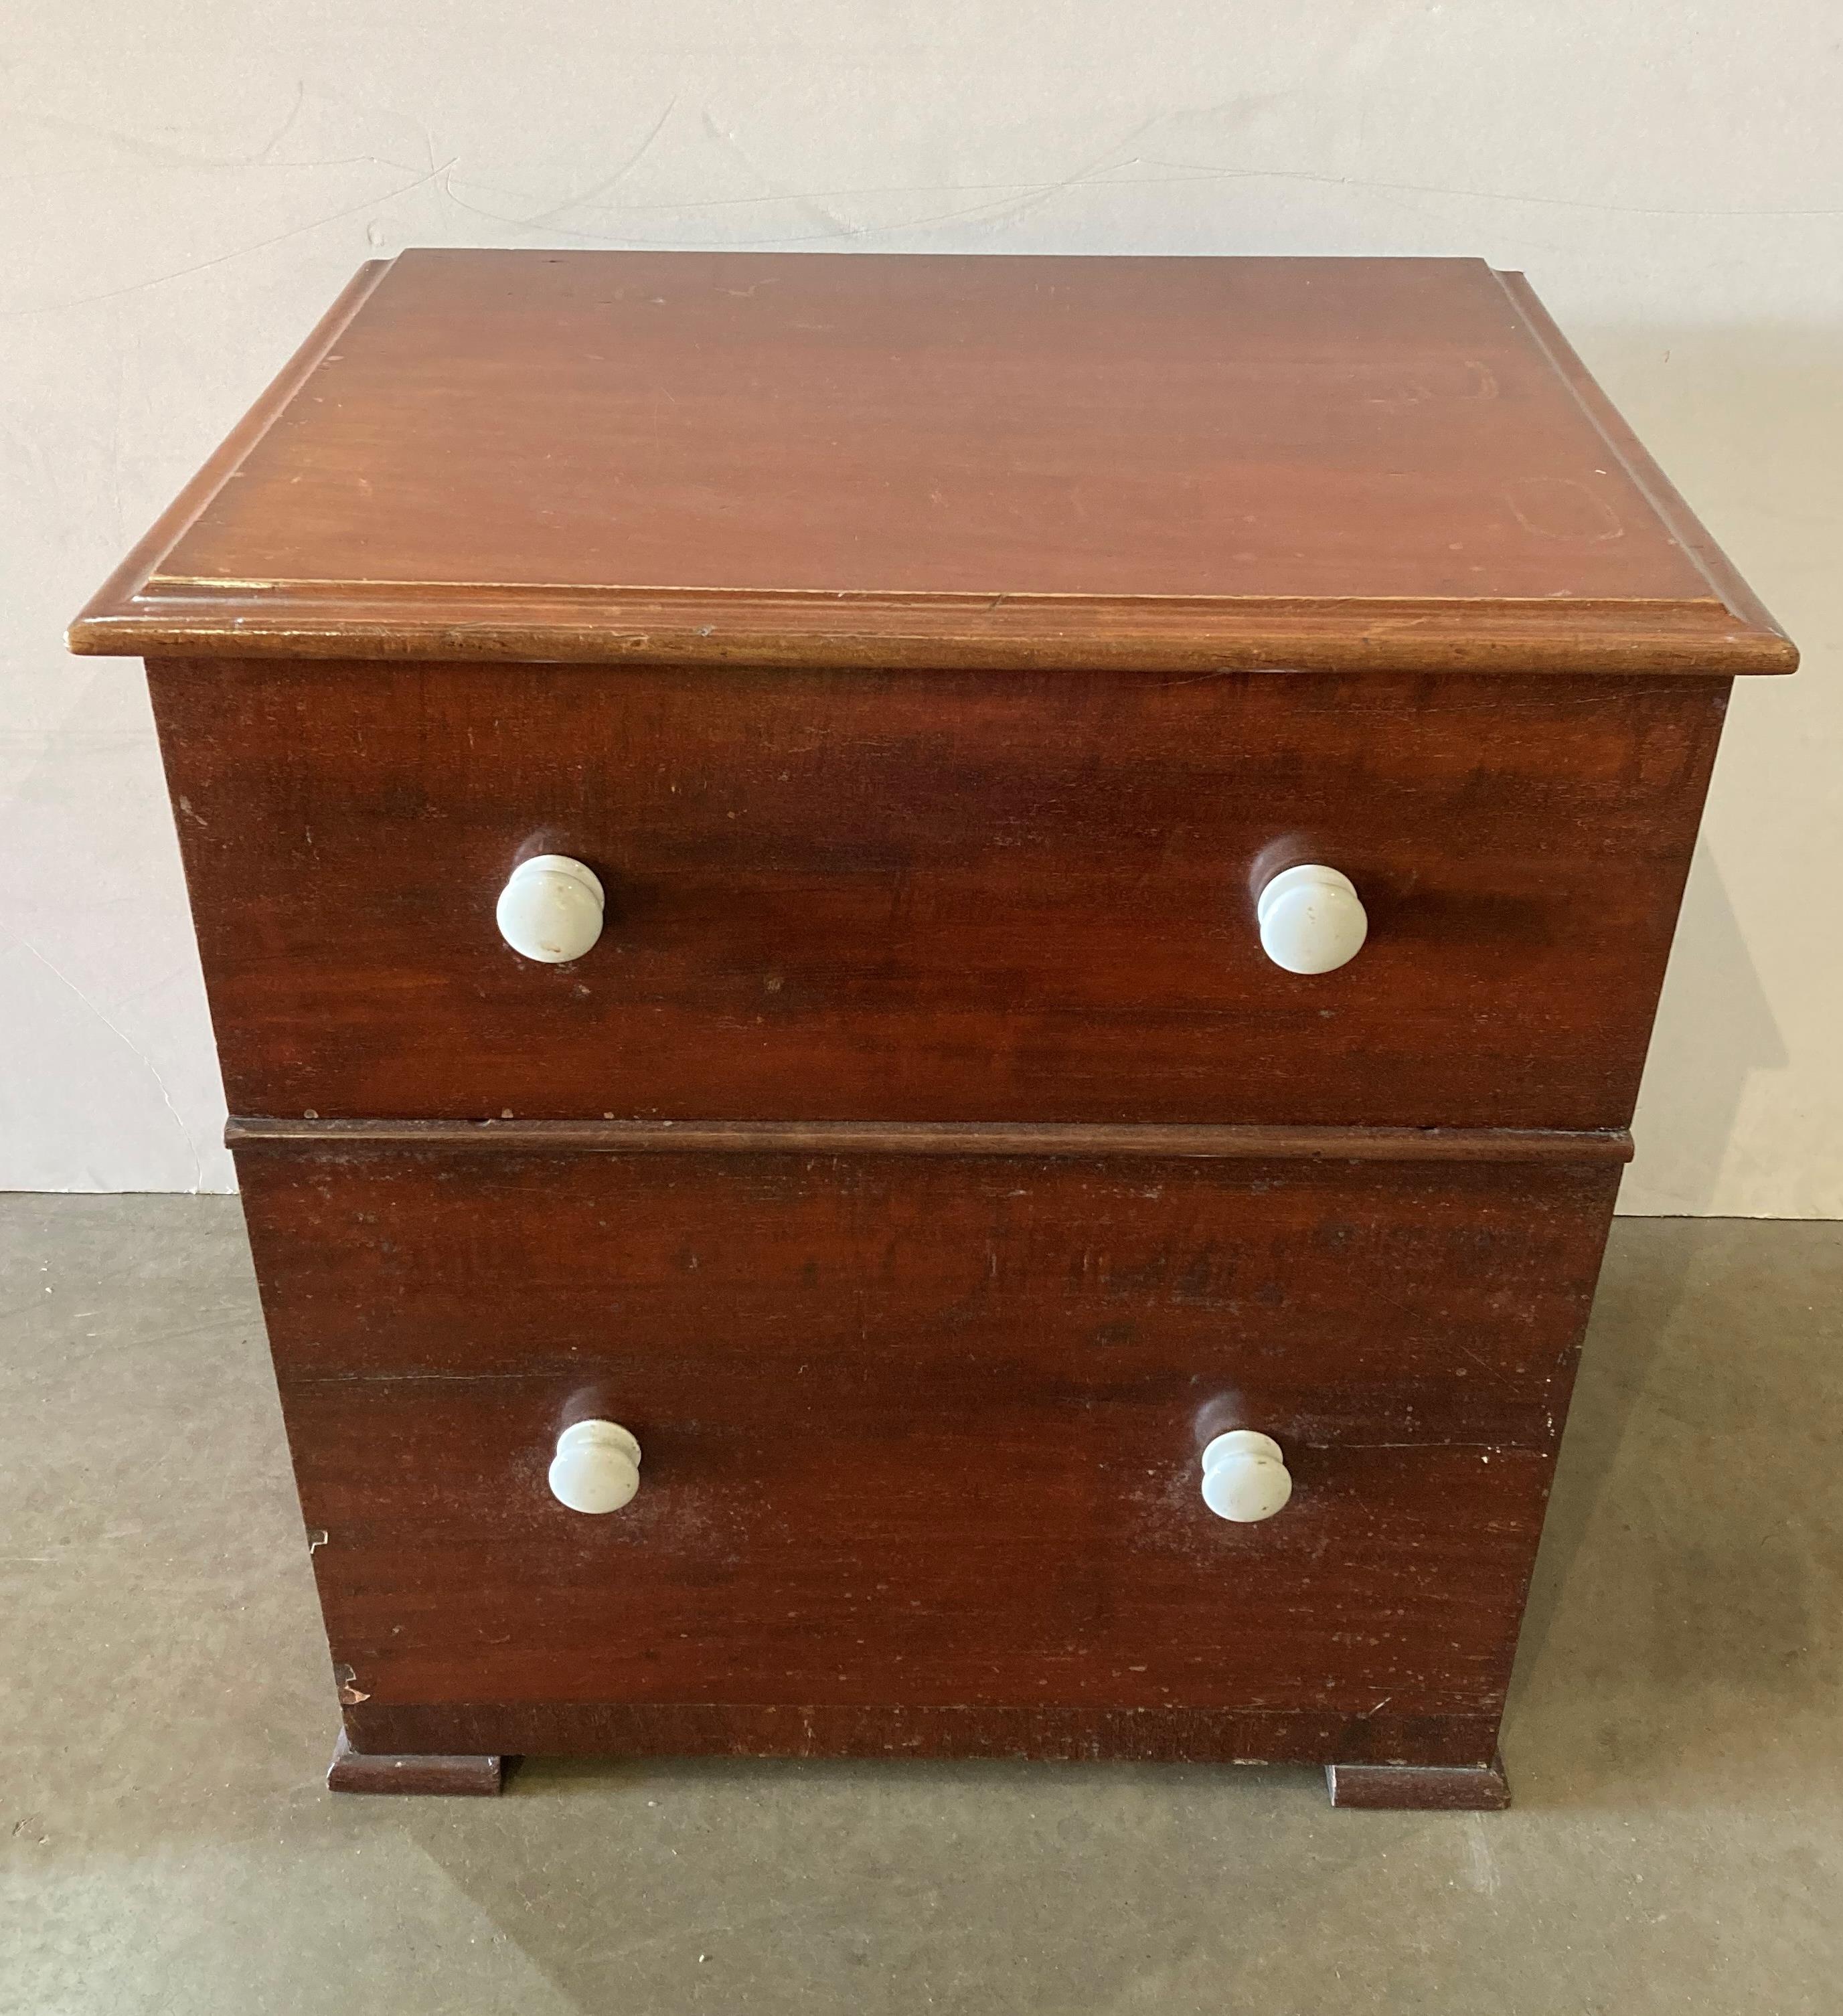 Vintage mahogany commode with lift-up top and original ceramic insert and white handles,